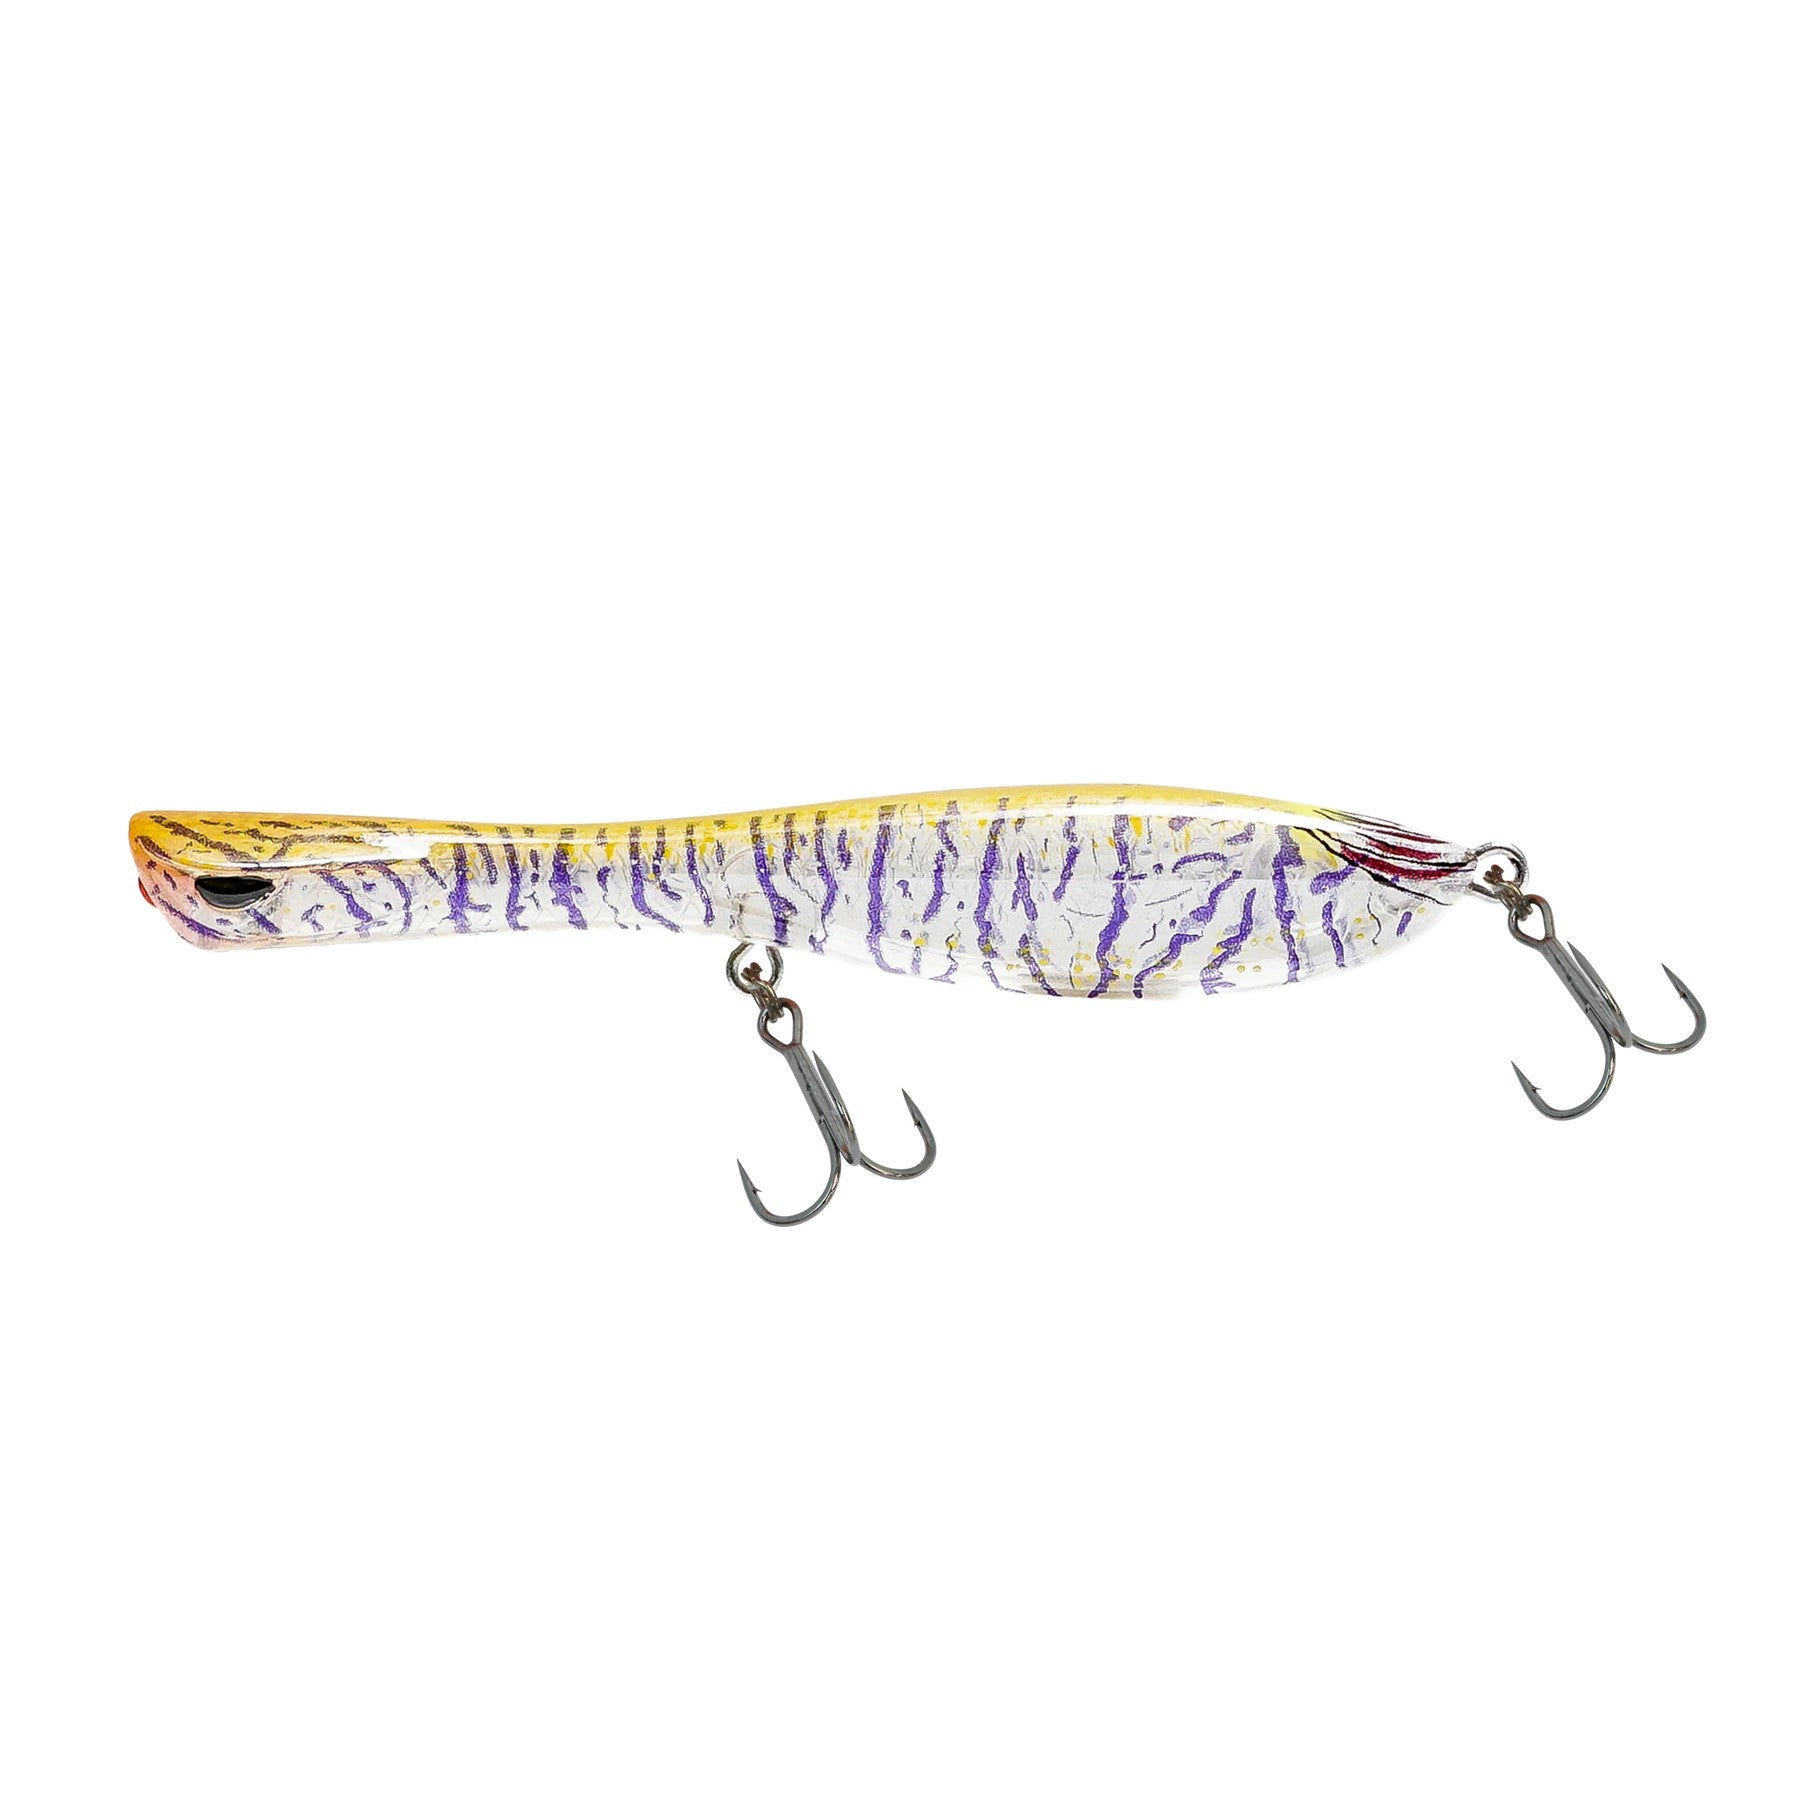 Nomad Dartwing 70 - Compleat Angler Nedlands Pro Tackle